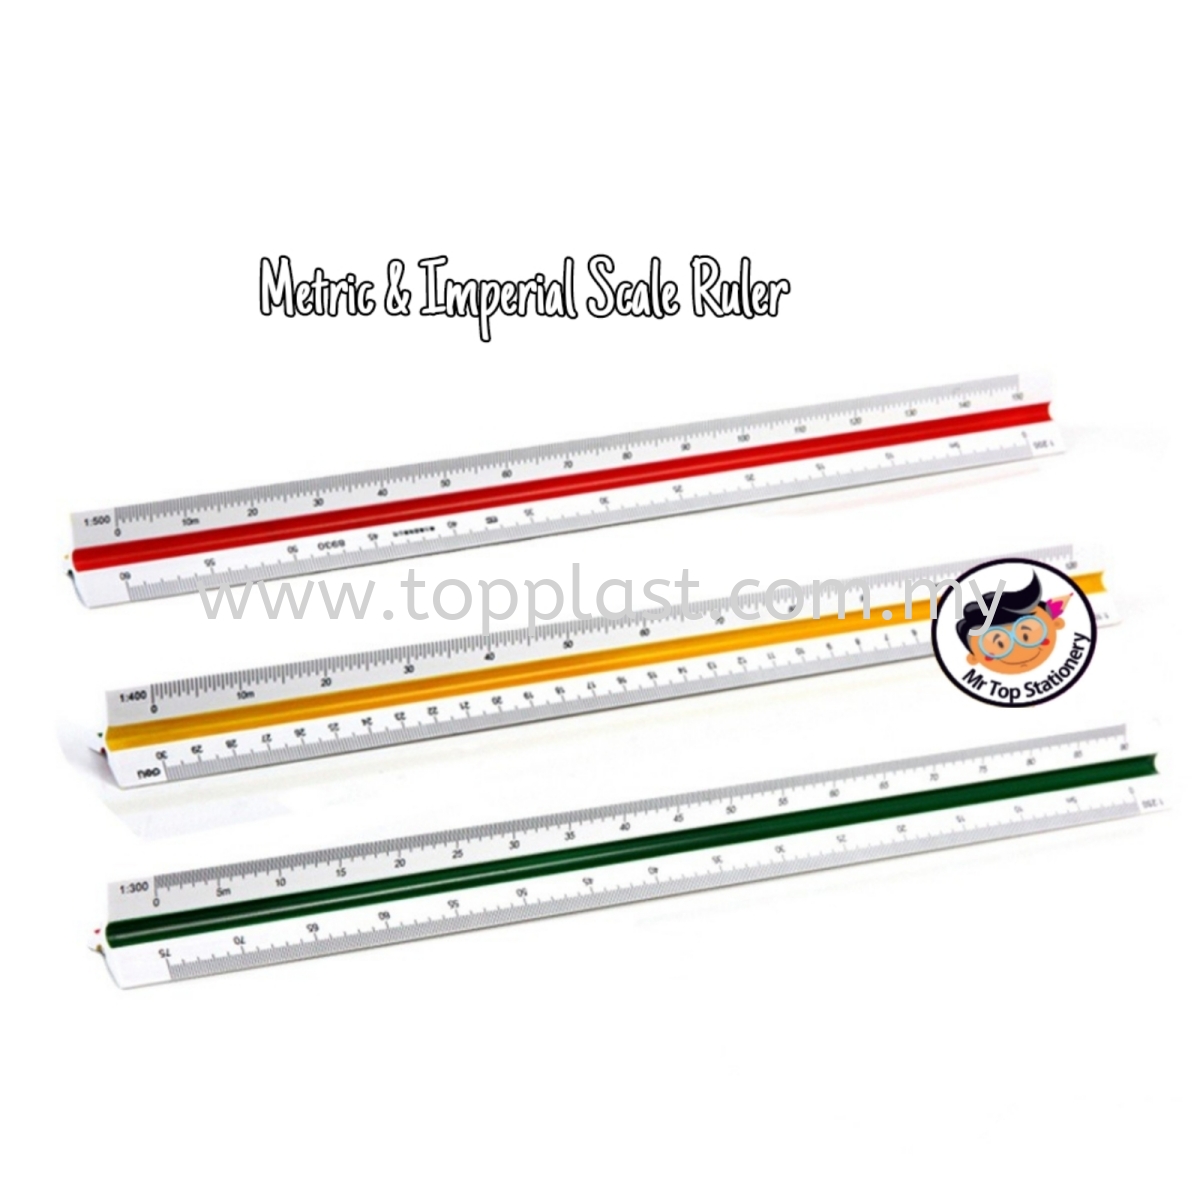 Metric and Imperial Scale Ruler Ruler Penang, Malaysia Supplier,  Manufacturer, Supply, Supplies | Top Plast Enterprise